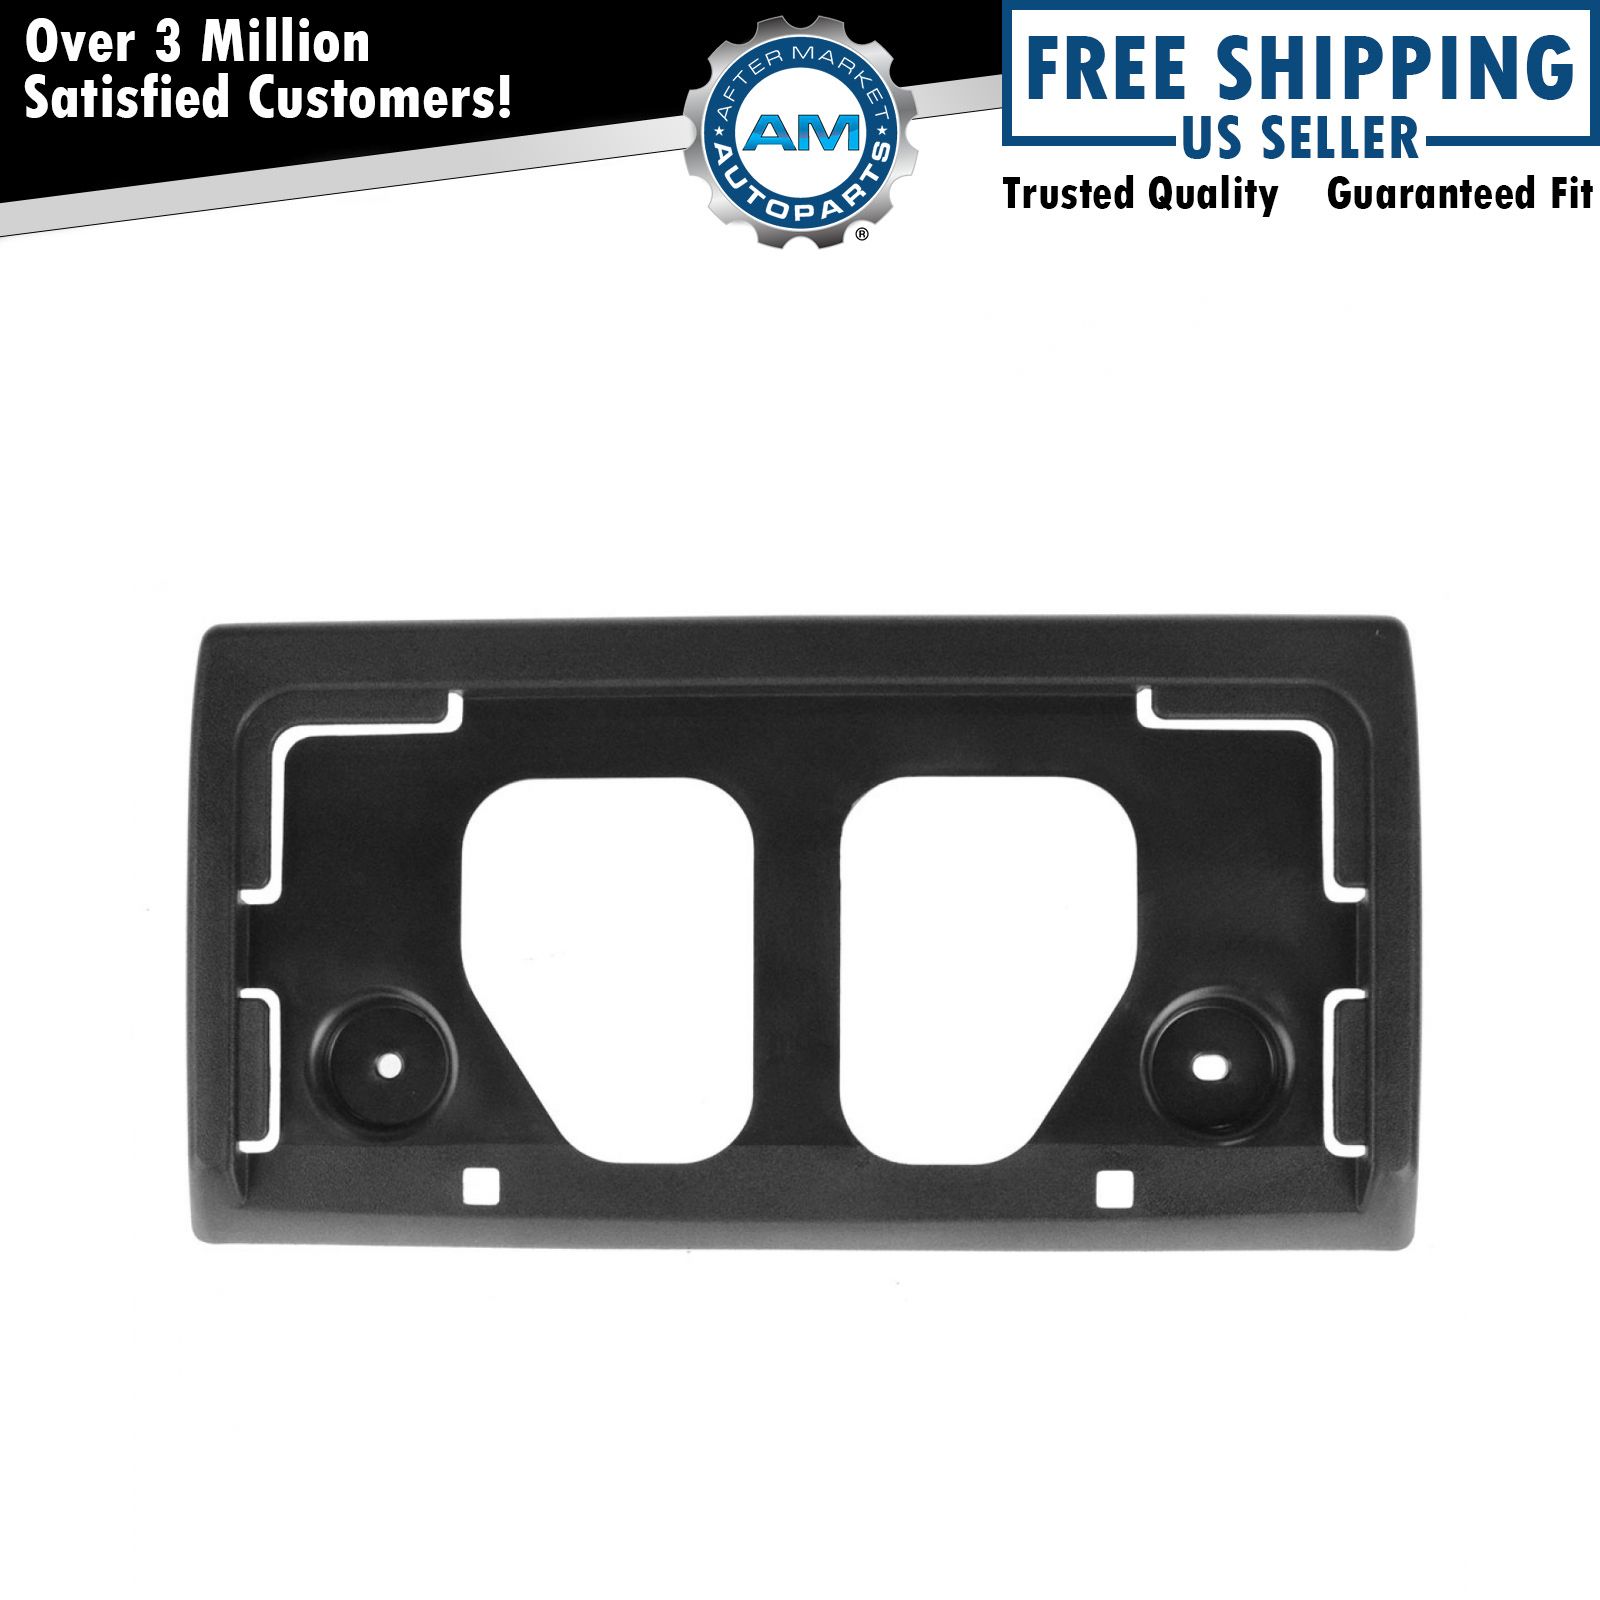 License Plate Bracket Front for 04-12 Chevy Colorado GMC Canyon